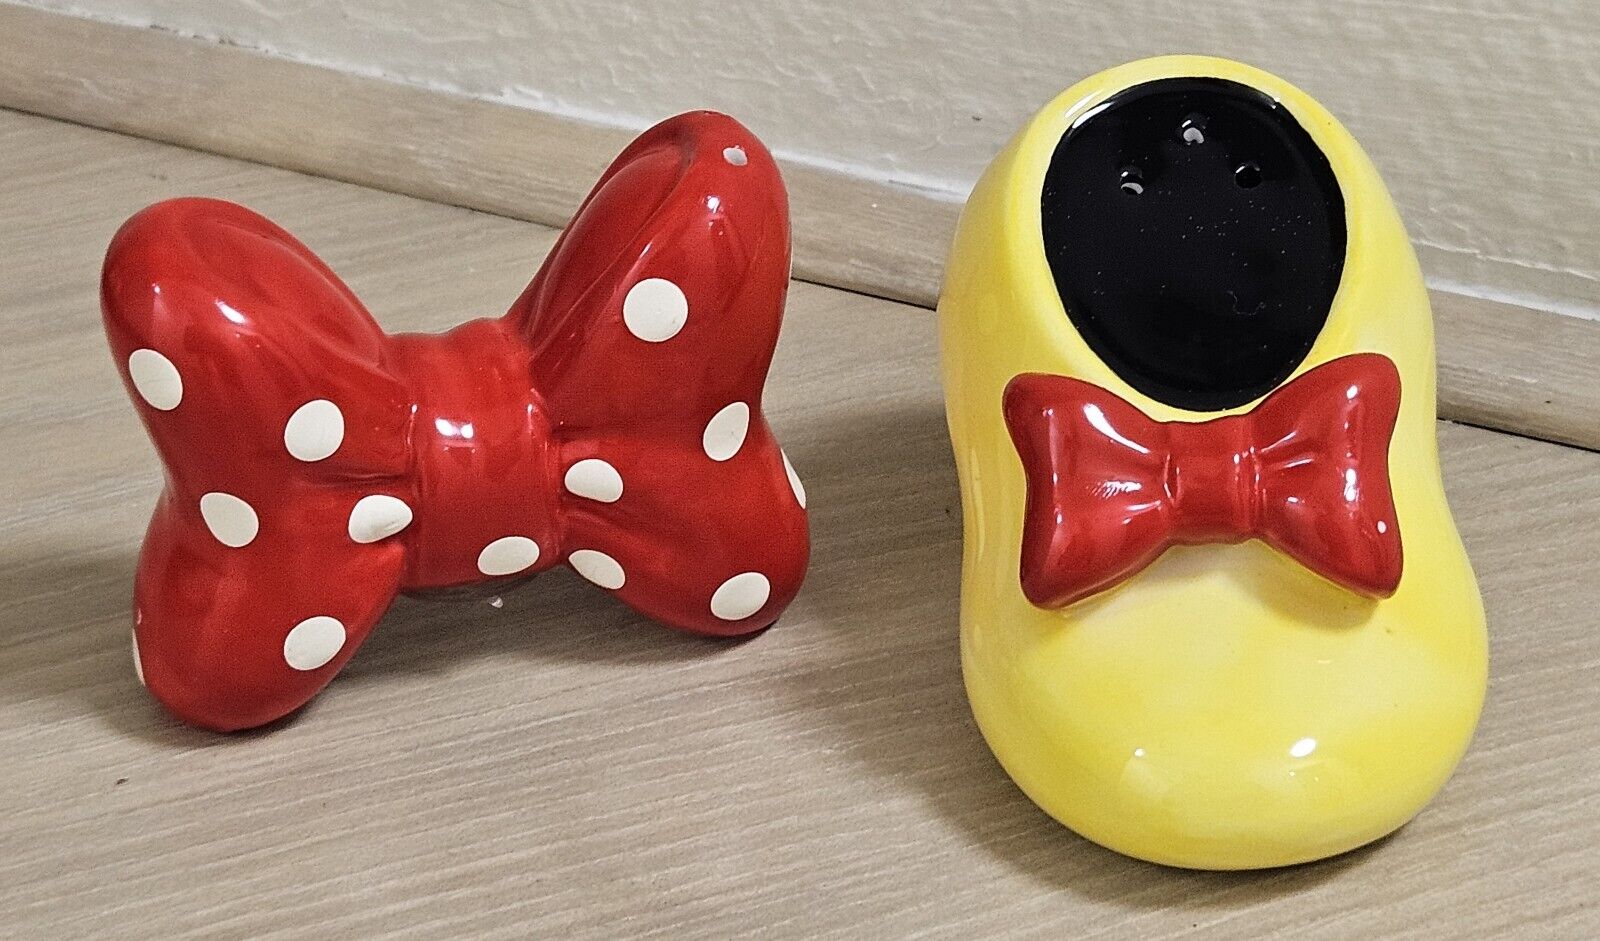 VINTAGE 2 PCS DISNEY MINNIE MOUSE SALT & PEPPER SHAKERS RED BOW & YELLOW HEEL